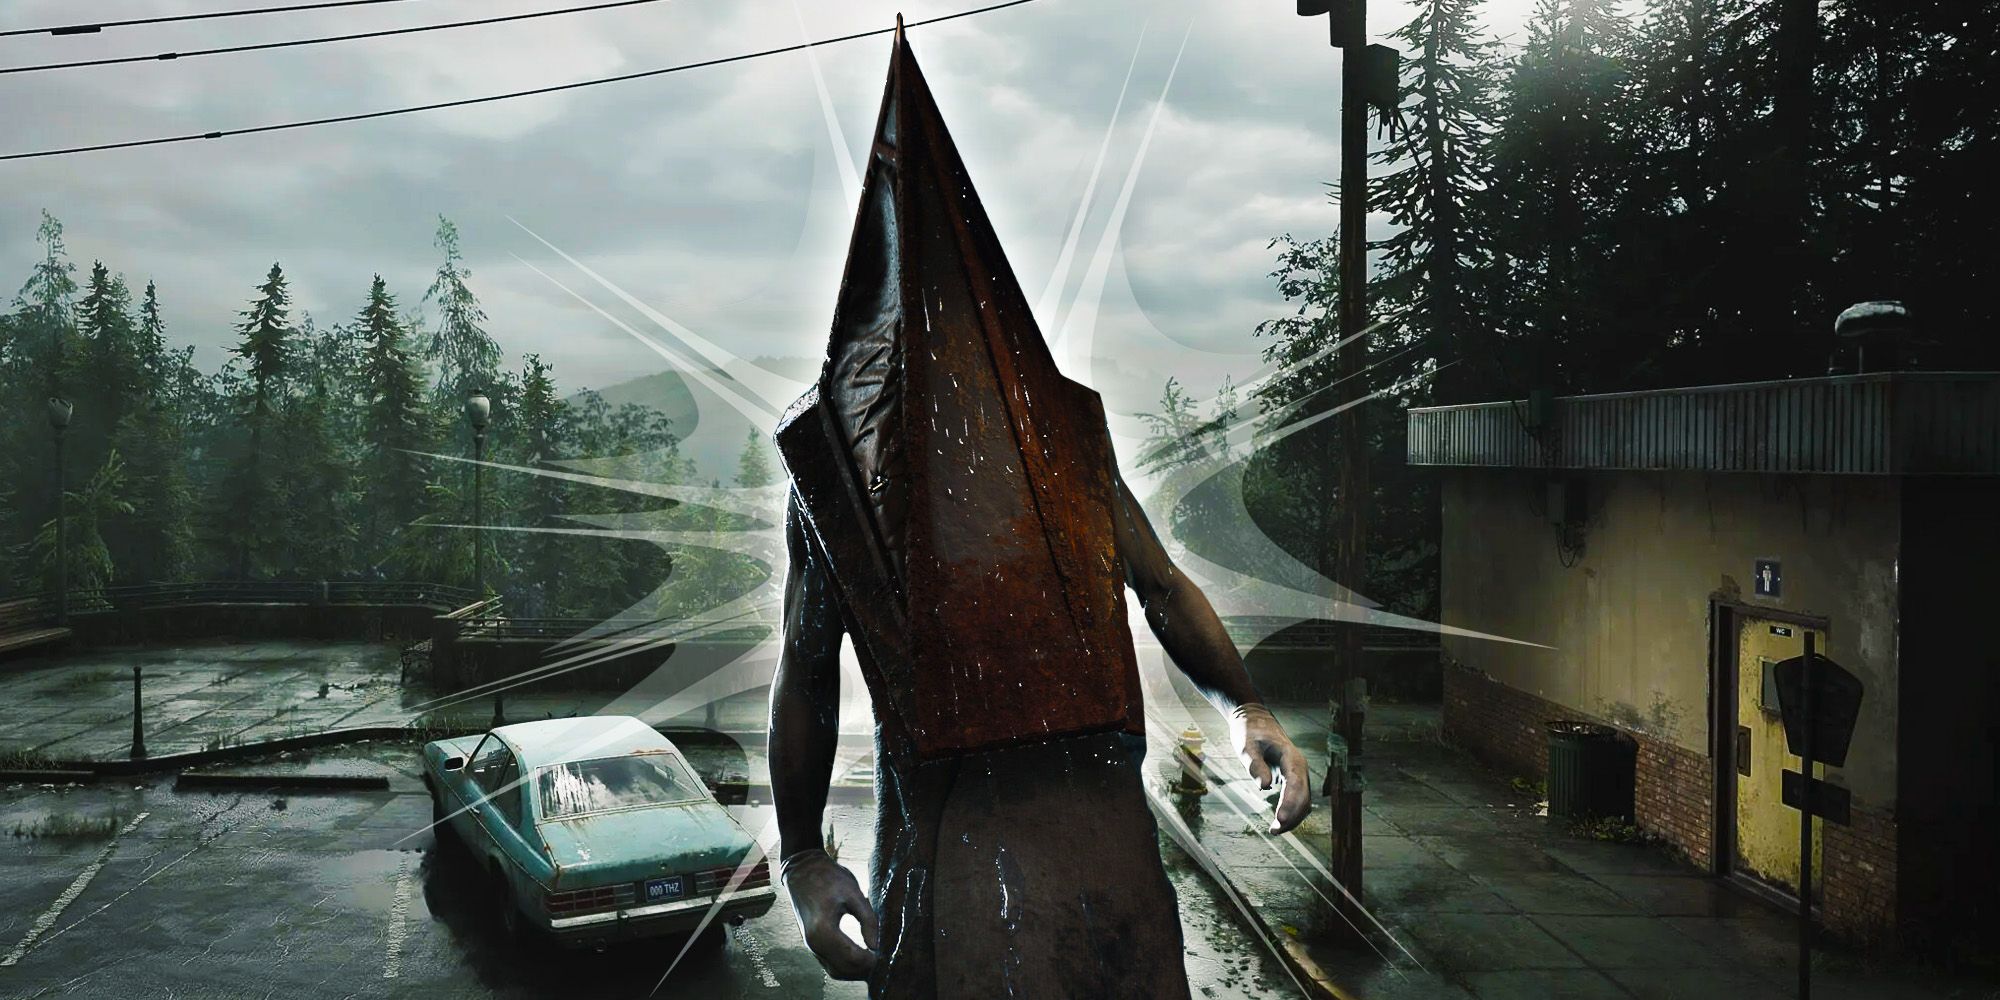 Silent Hill 2 Remake includes a playable origin story for the series' most  famous baddie Pyramid Head according to a Best Buy listing. Link…